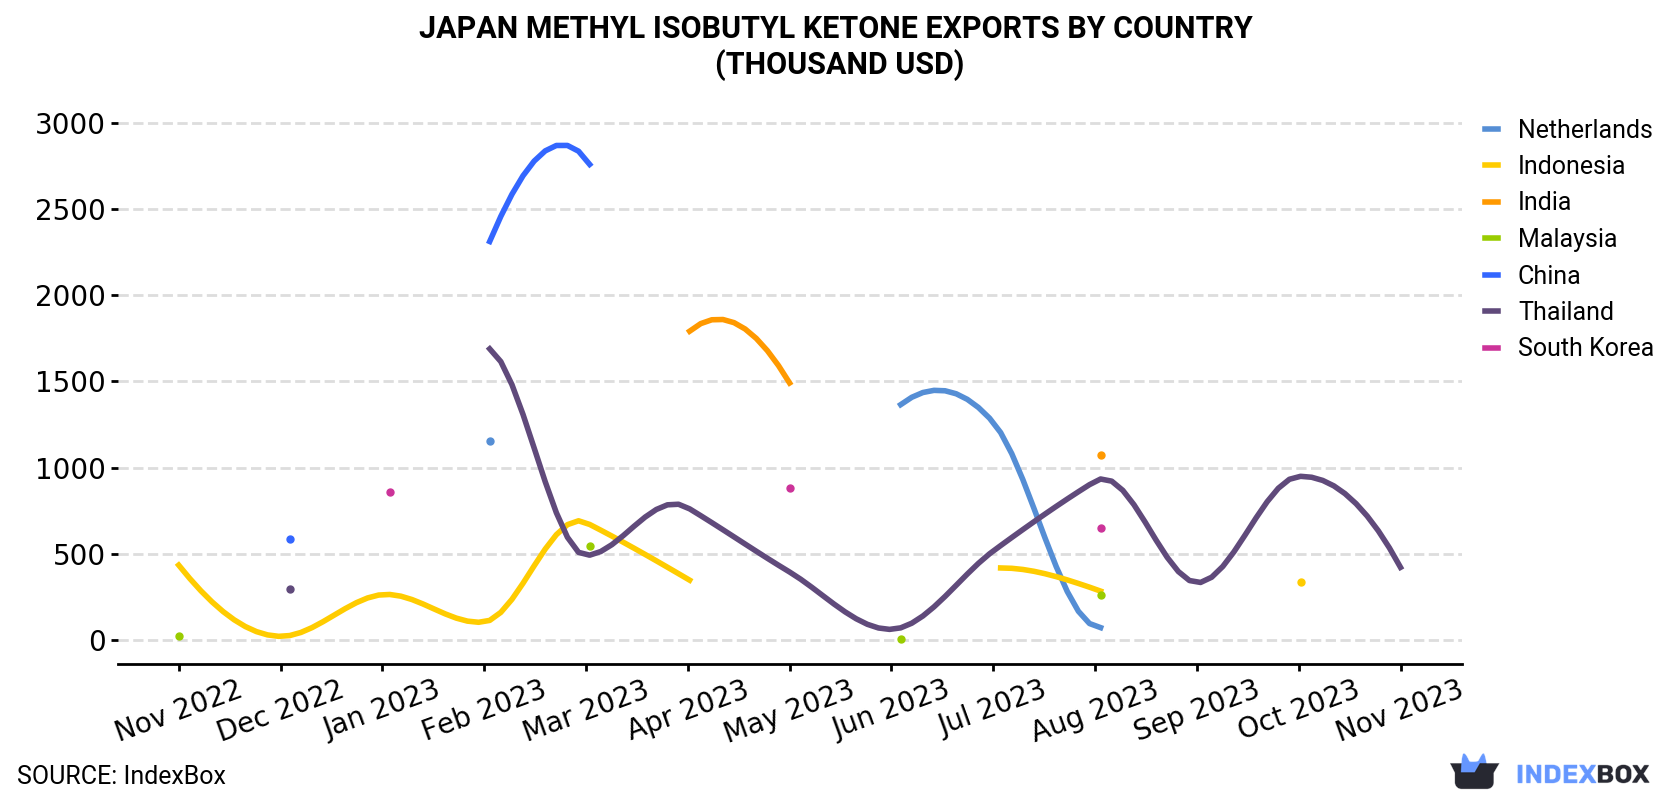 Japan Methyl Isobutyl Ketone Exports By Country (Thousand USD)